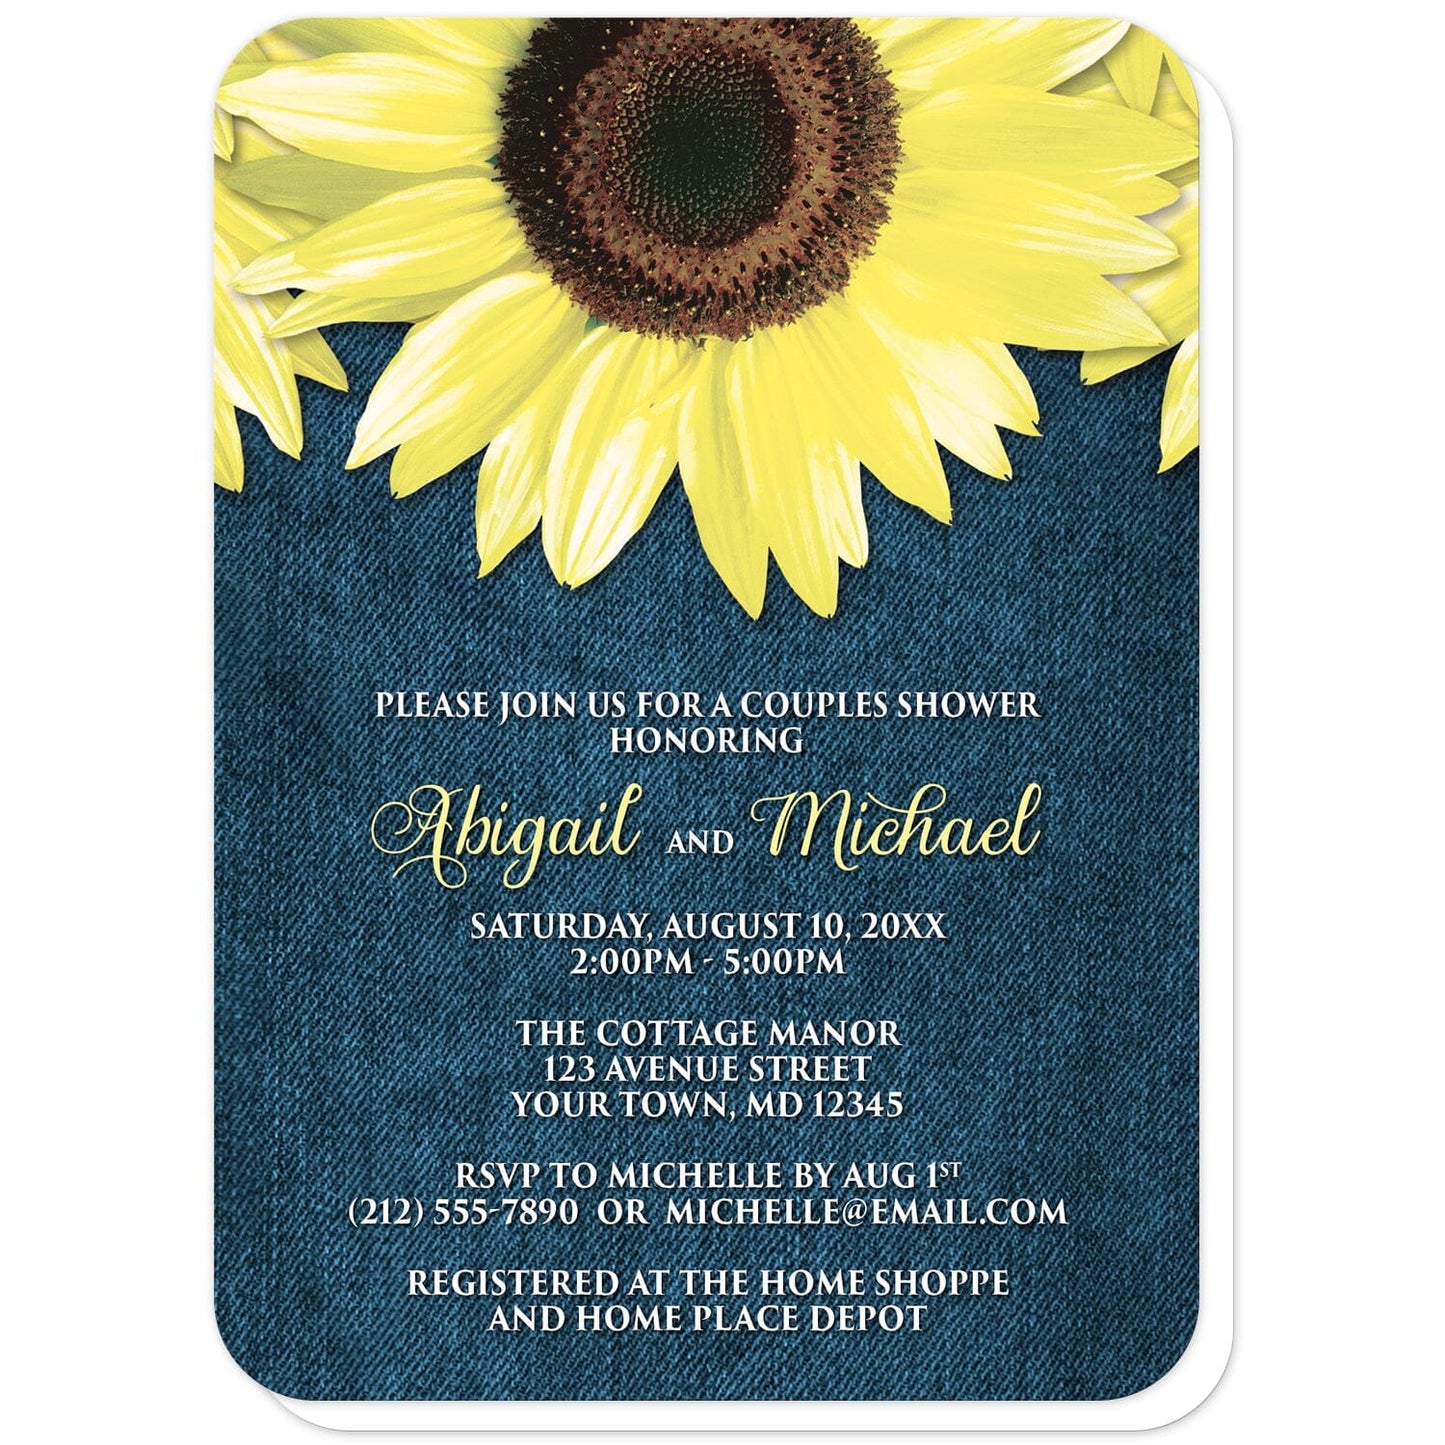 Rustic Sunflower and Denim Couples Shower Invitations (with rounded corners) at Artistically Invited. Southern-inspired rustic sunflower and denim couples shower invitations designed with large yellow sunflowers along the top over a country blue denim design. Your personalized couples shower celebration details are custom printed in yellow and white over the blue denim background below the pretty sunflowers. 